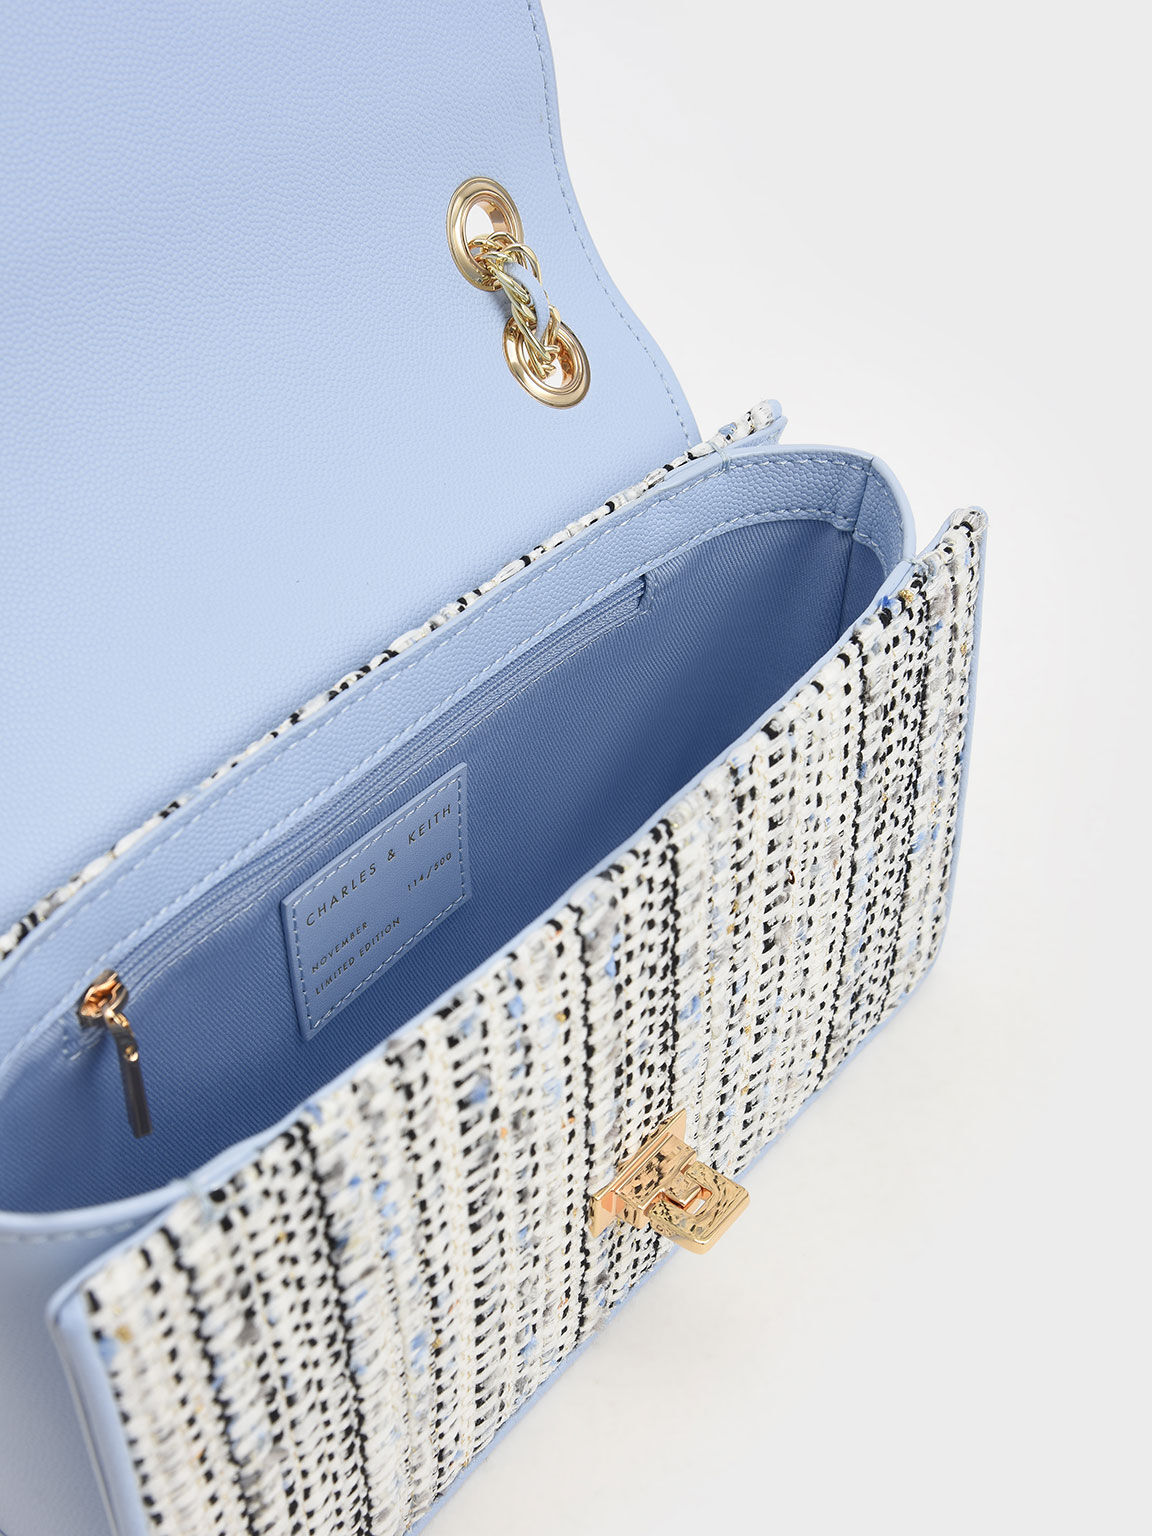 TÚI ĐEO CHÉO CHARLES KEITH C-CAPSULE COLLECTION: EVERETTE CHAIN-STRAP SHOULDER BAG 14